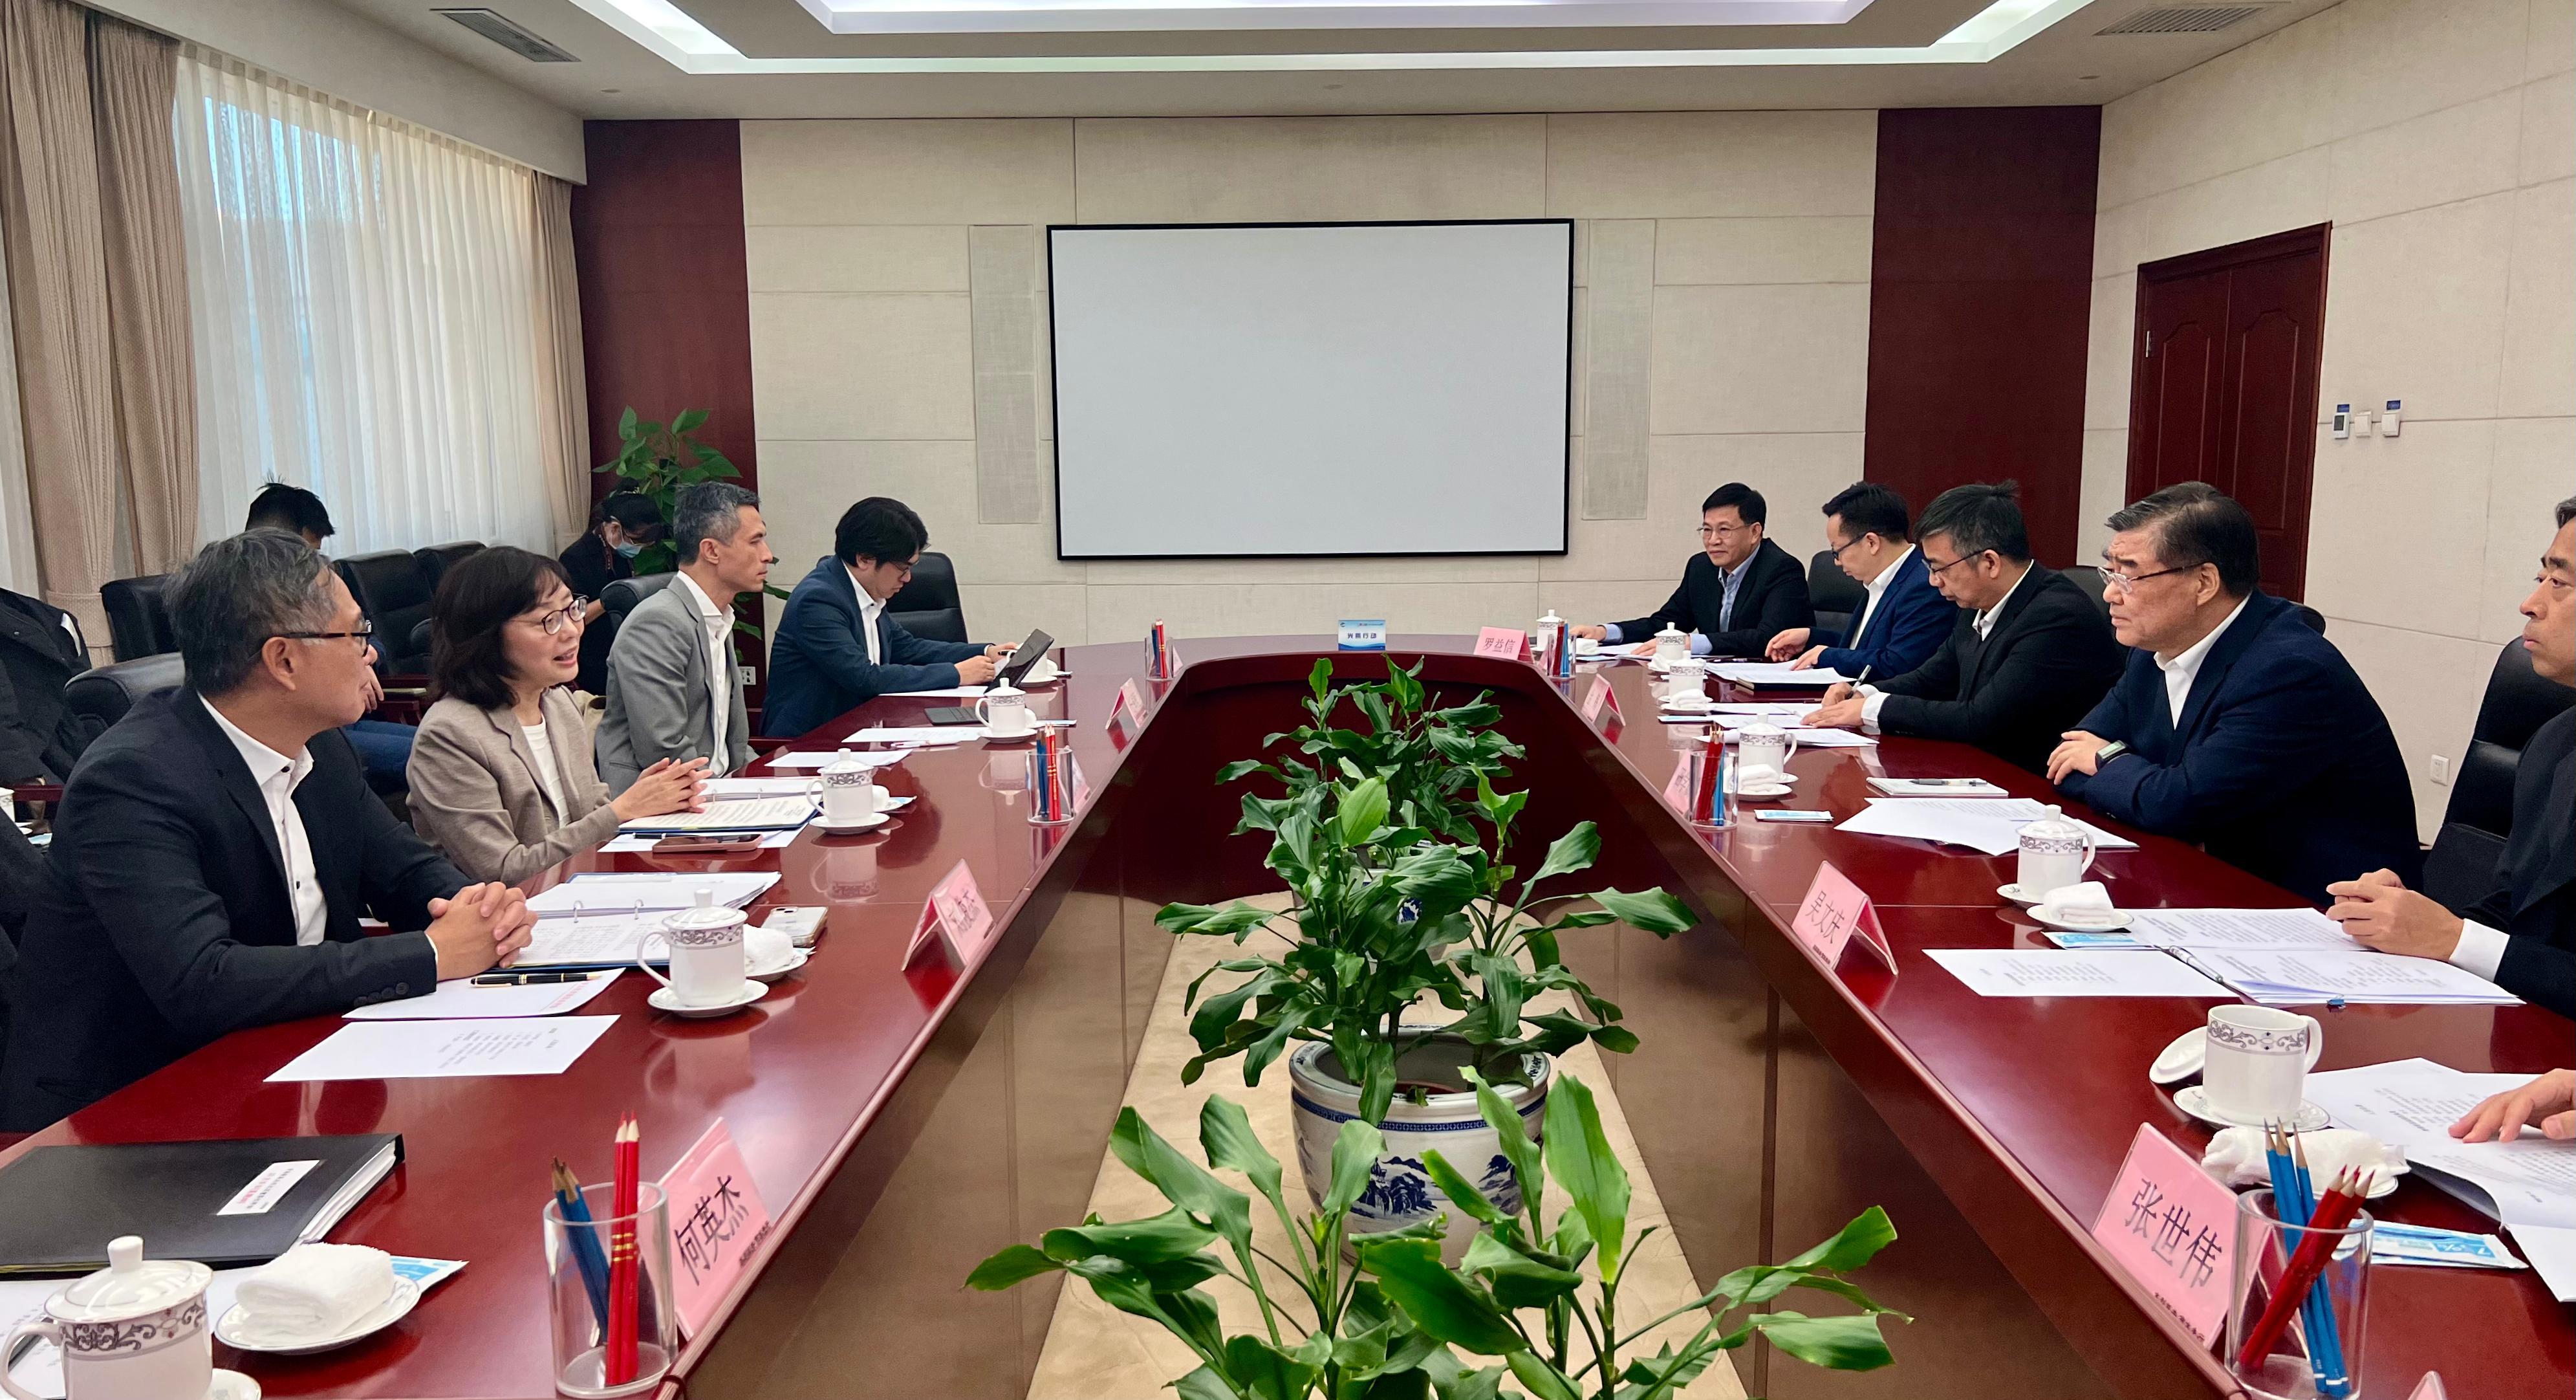 The Secretary for Development, Ms Bernadette Linn (second left), met with Vice Minister of the Ministry of Water Resources Mr Tian Xuebin (second right), in Beijing today (November 9). The Permanent Secretary for Development (Works), Mr Ricky Lau (first left), and the Director of the Northern Metropolis Co-ordination Office, Mr Vic Yau (third left), also attended.